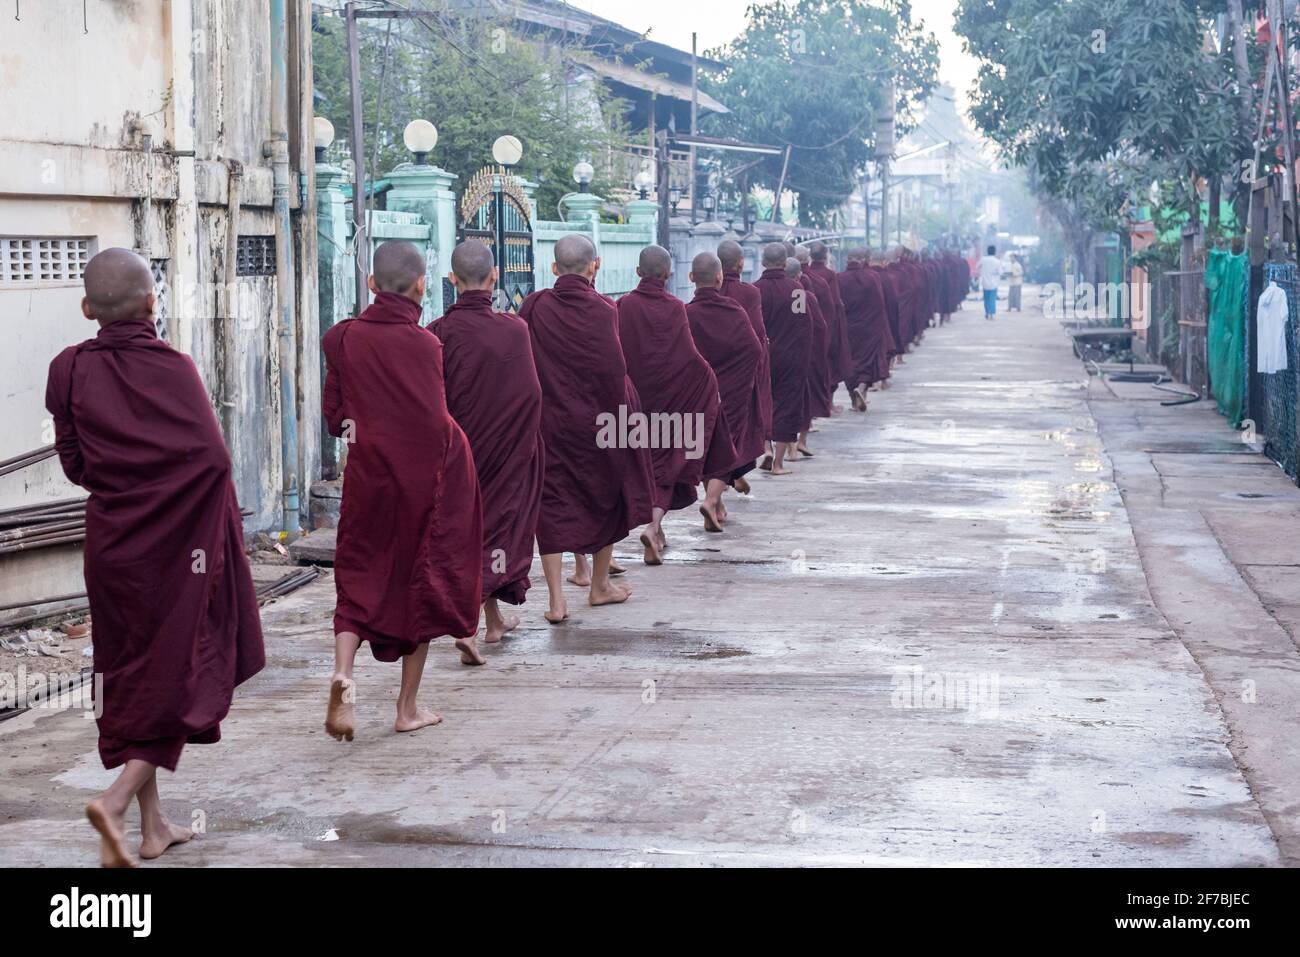 Monks walking in the streets of Bago collecting food donations, Bago, Myanmar Stock Photo